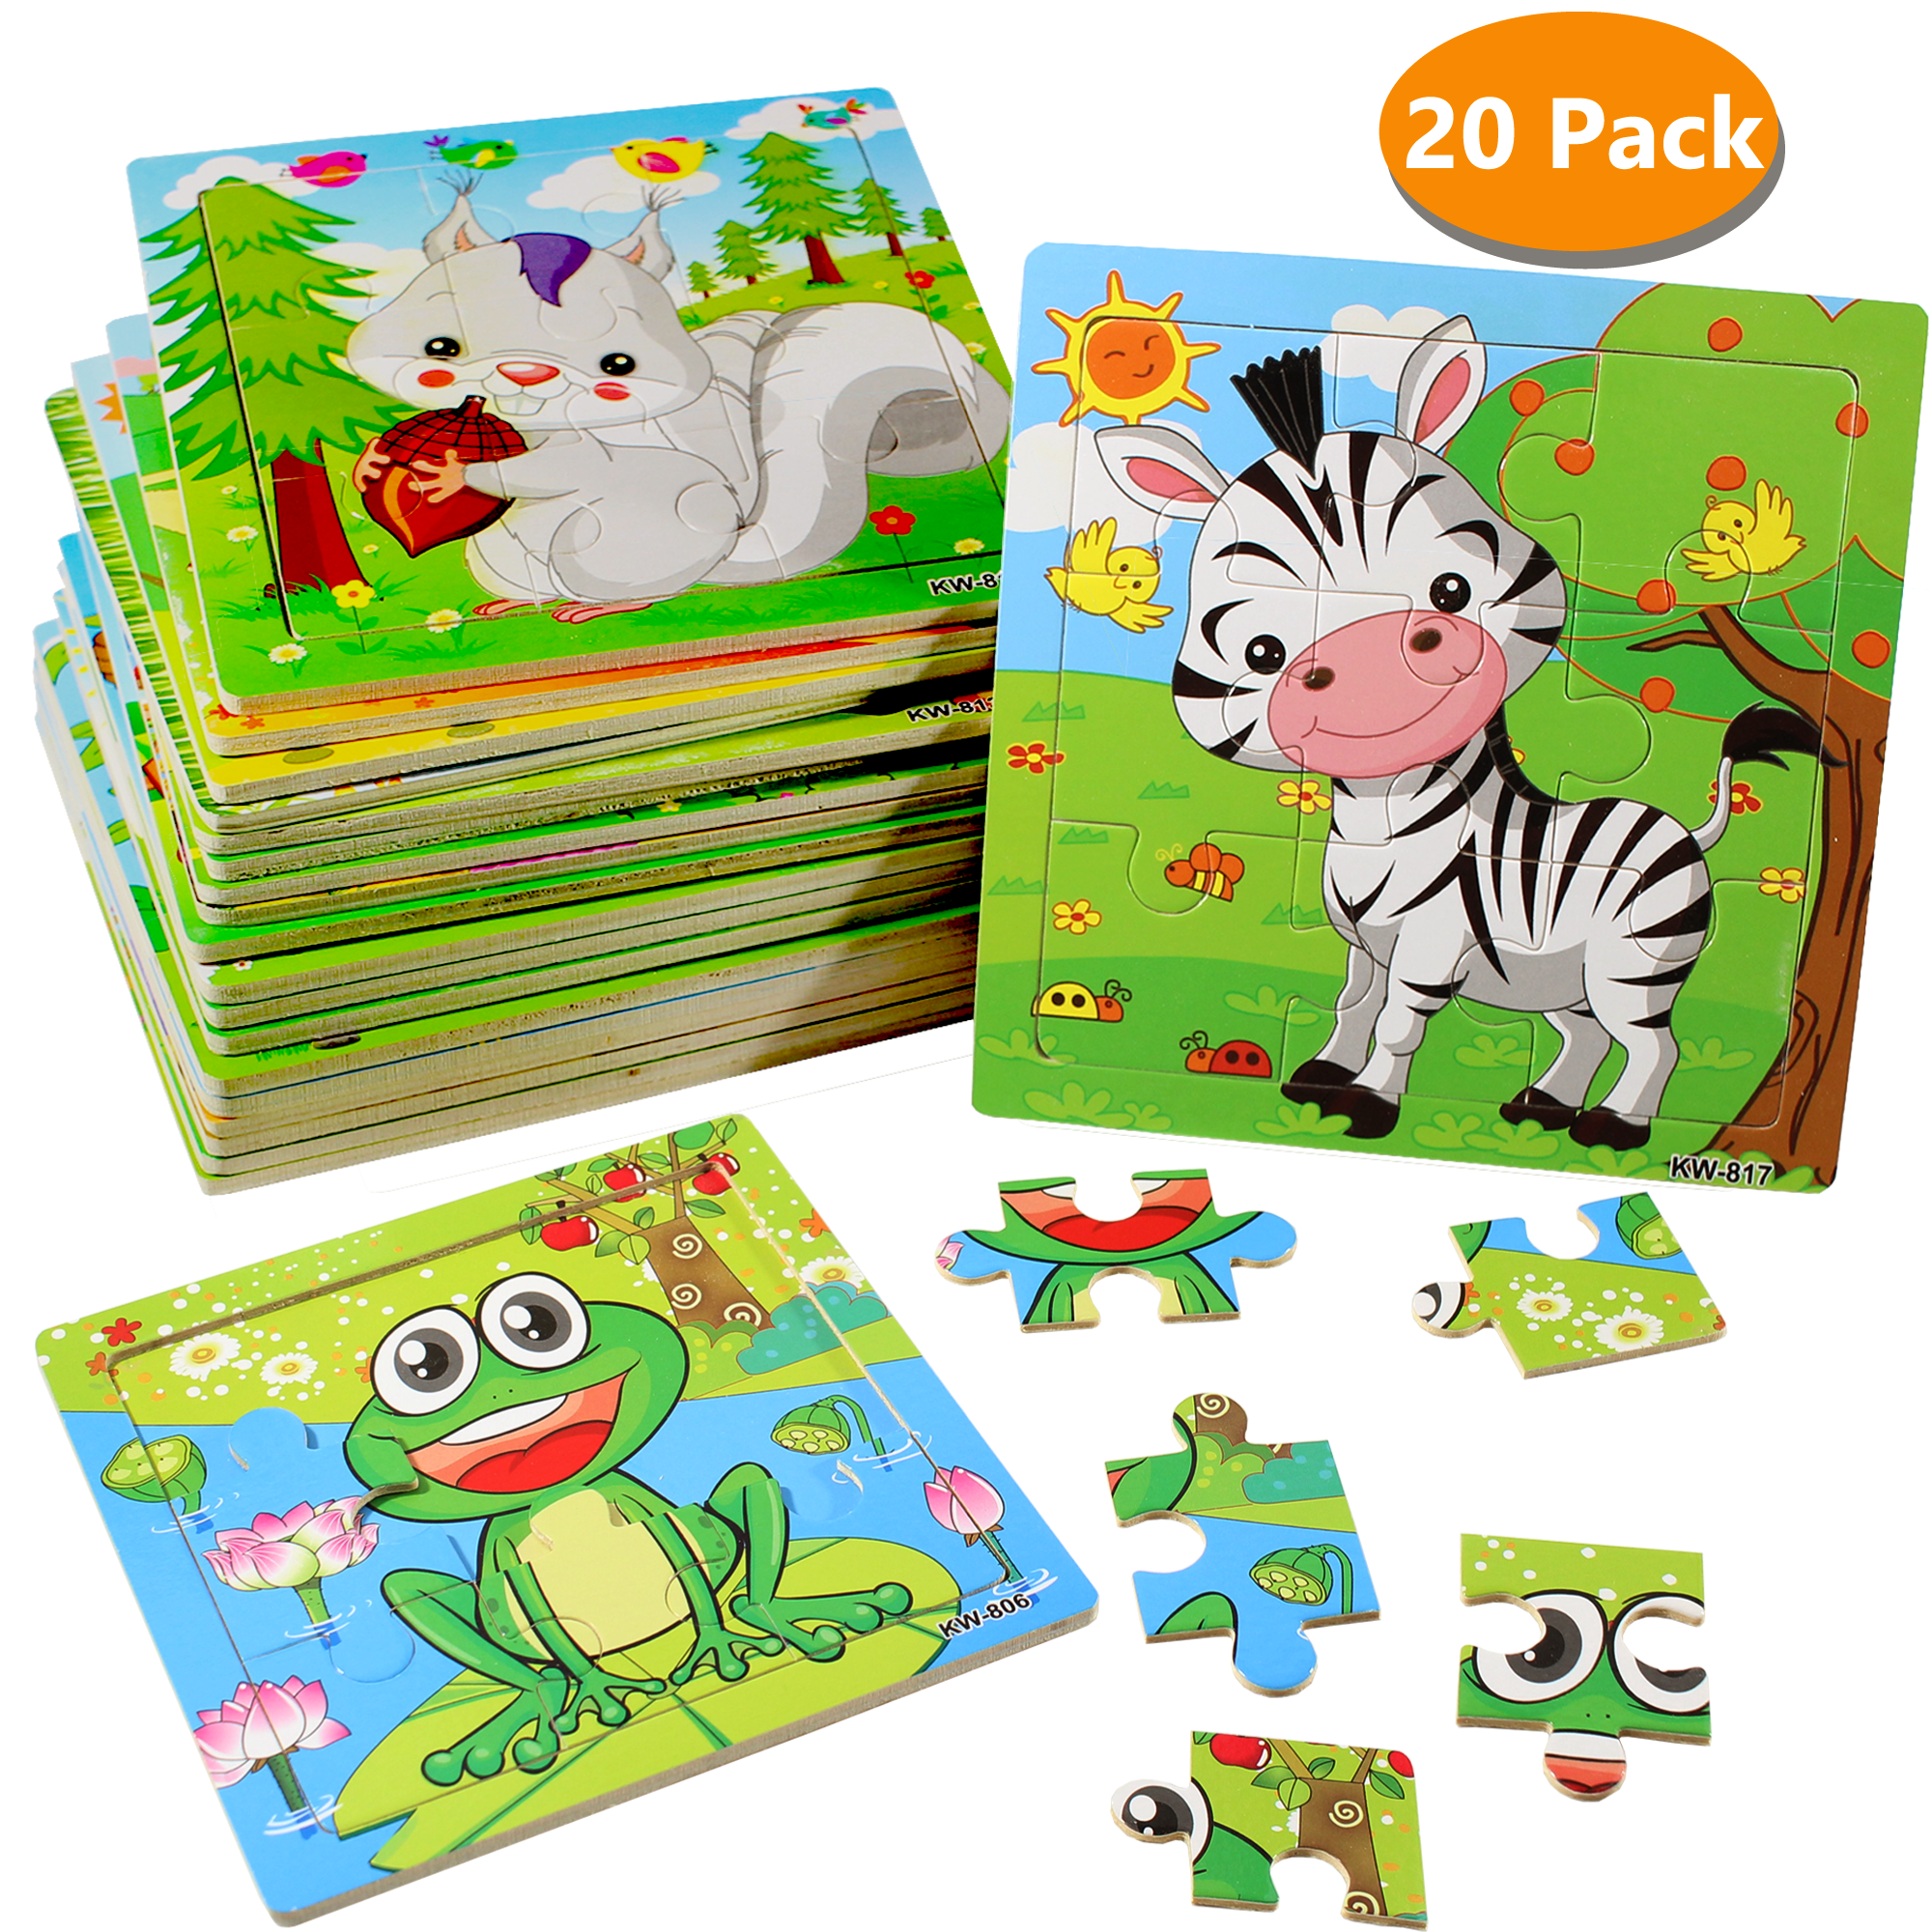 Kids Children Pre-School Wooden Jigsaw Early Learning Educational Puzzle Toy 2yr 